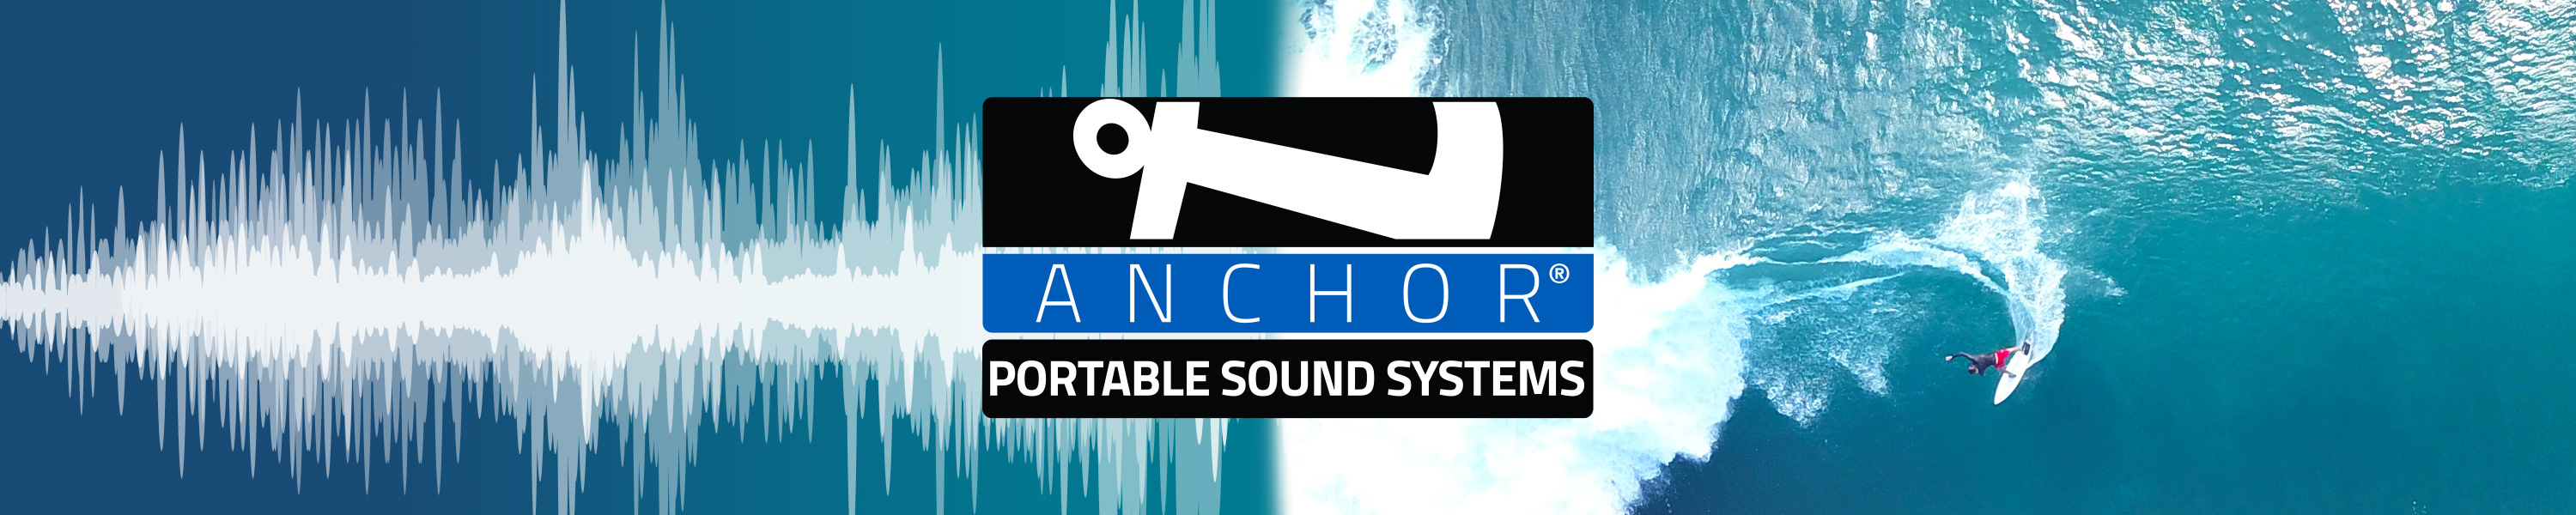 Anchor sound system and PA system